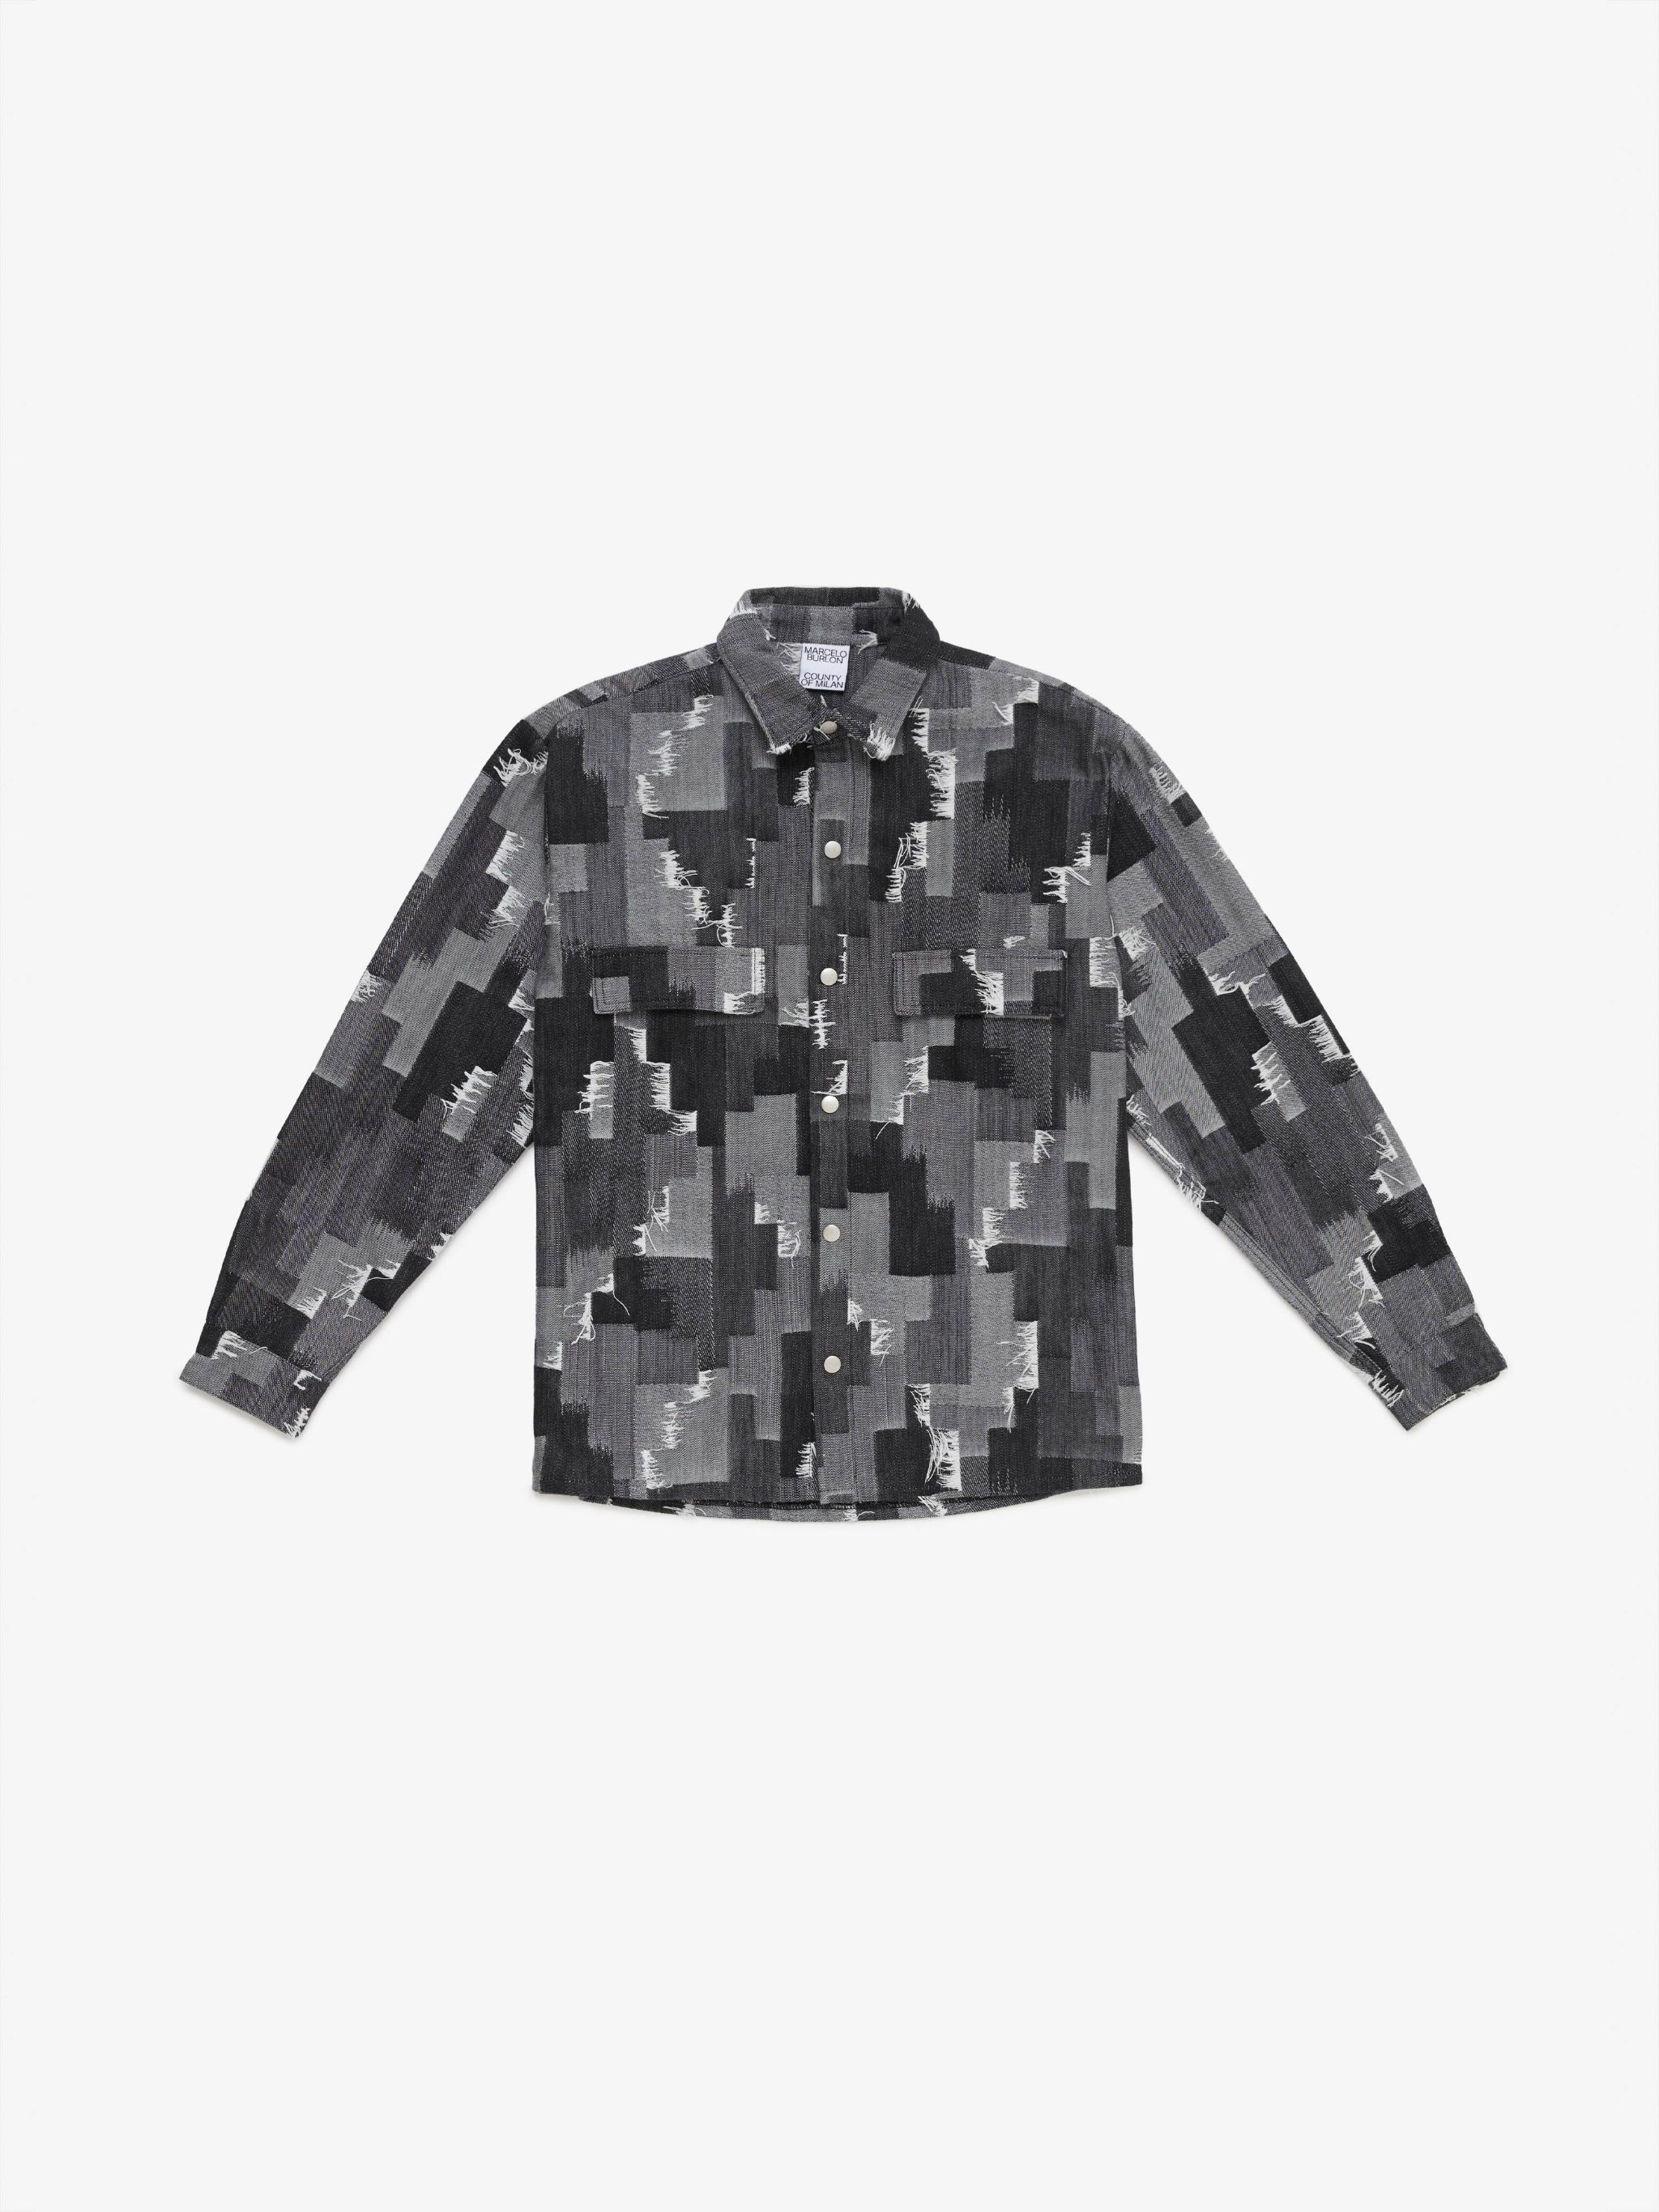 Cross-print shirt from Marcelo Burlon County of Milan featuring black/grey, cross print, spread collar, front button fastening, long sleeves, buttoned cuffs, two chest flap pockets and straight hem.